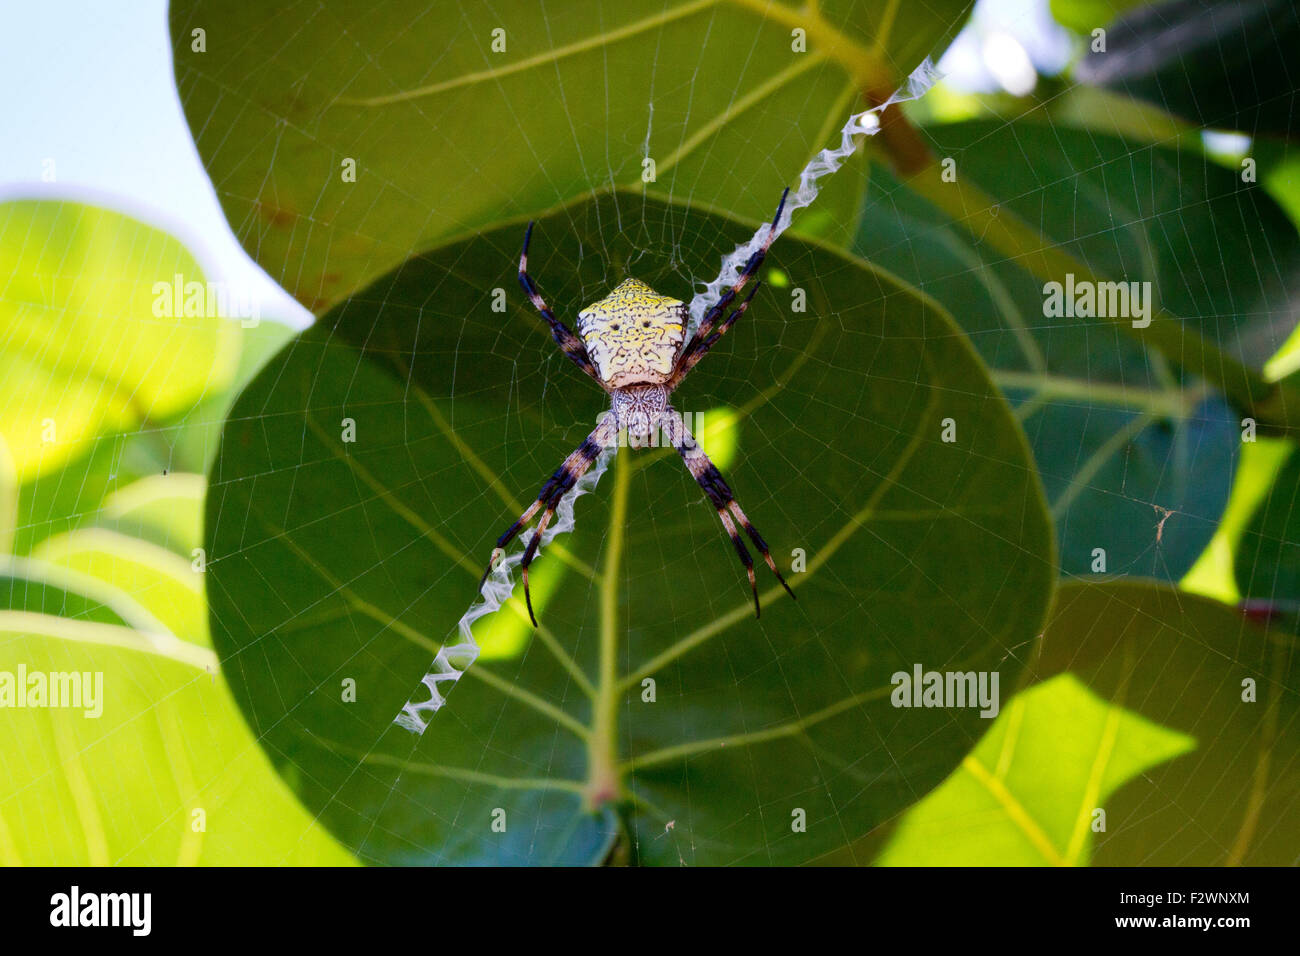 Hawaiian Garden Spider Argiope Appensa On Its Web In A Tree At